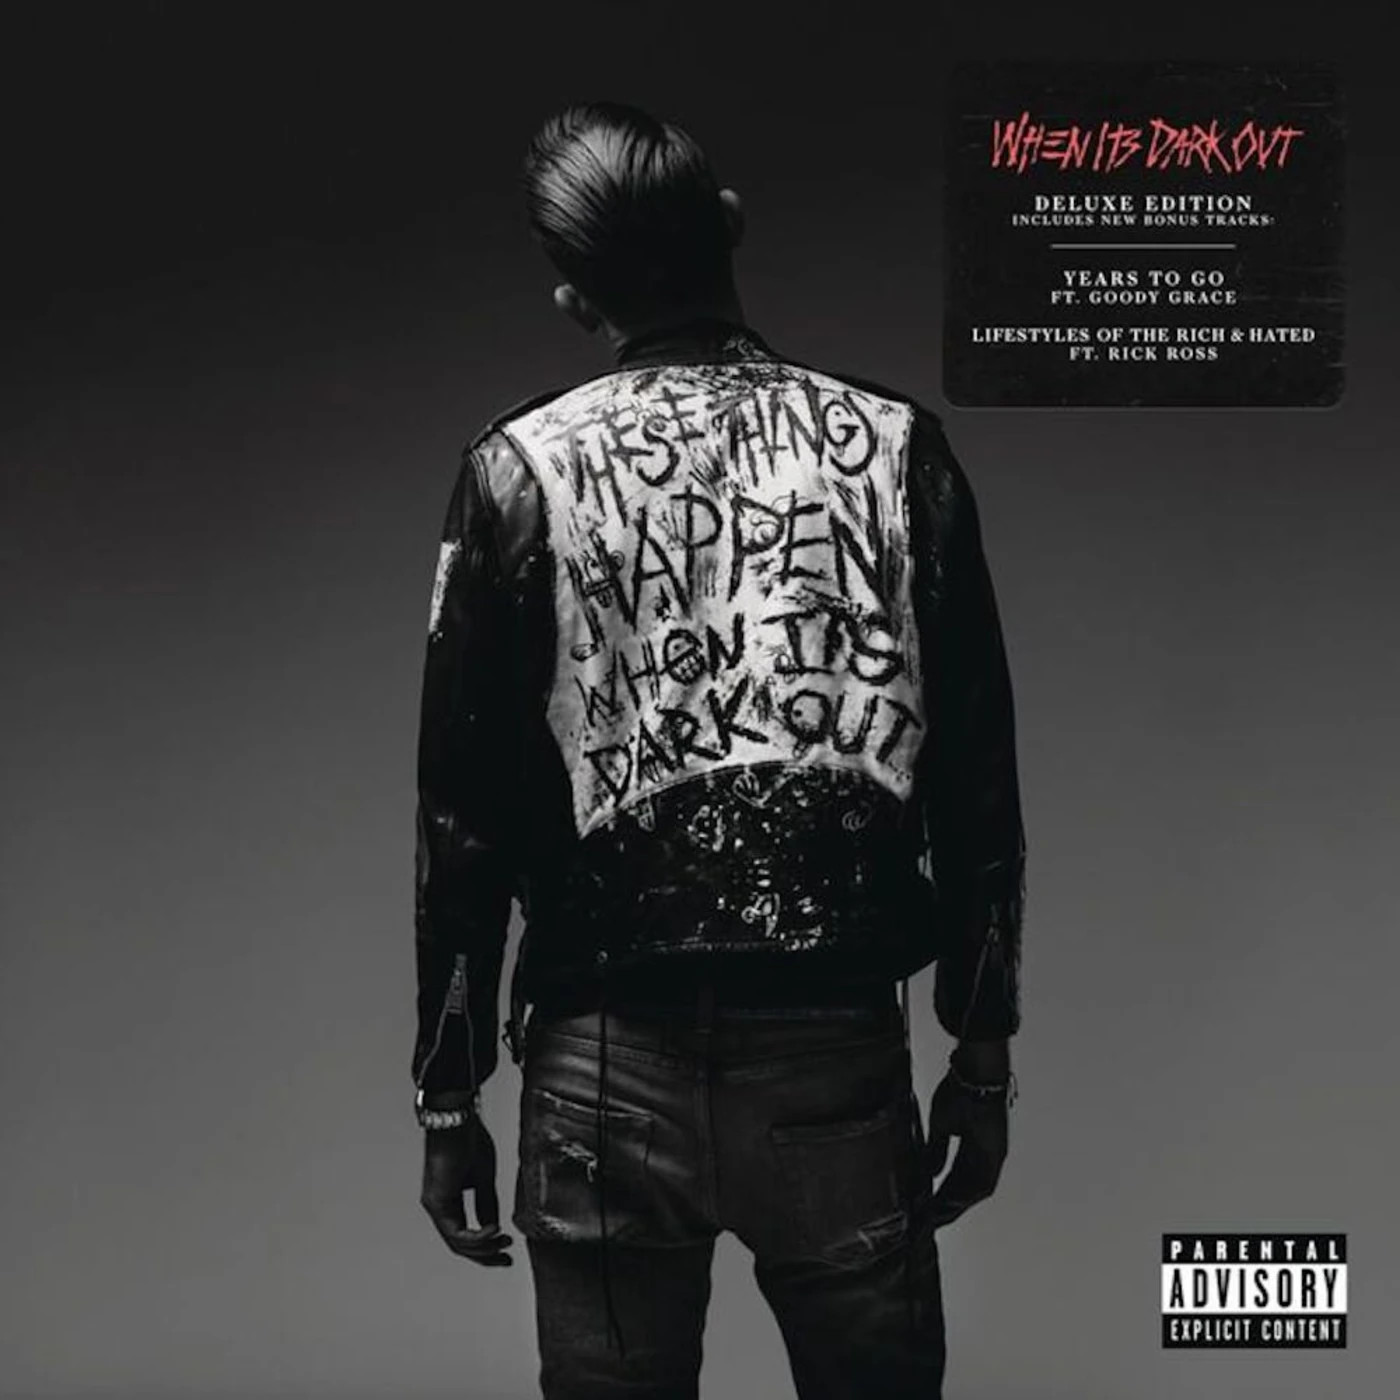 G-Eazy Enlists Rick Ross & Goody Grace For “When It’s Dark Out” Deluxe